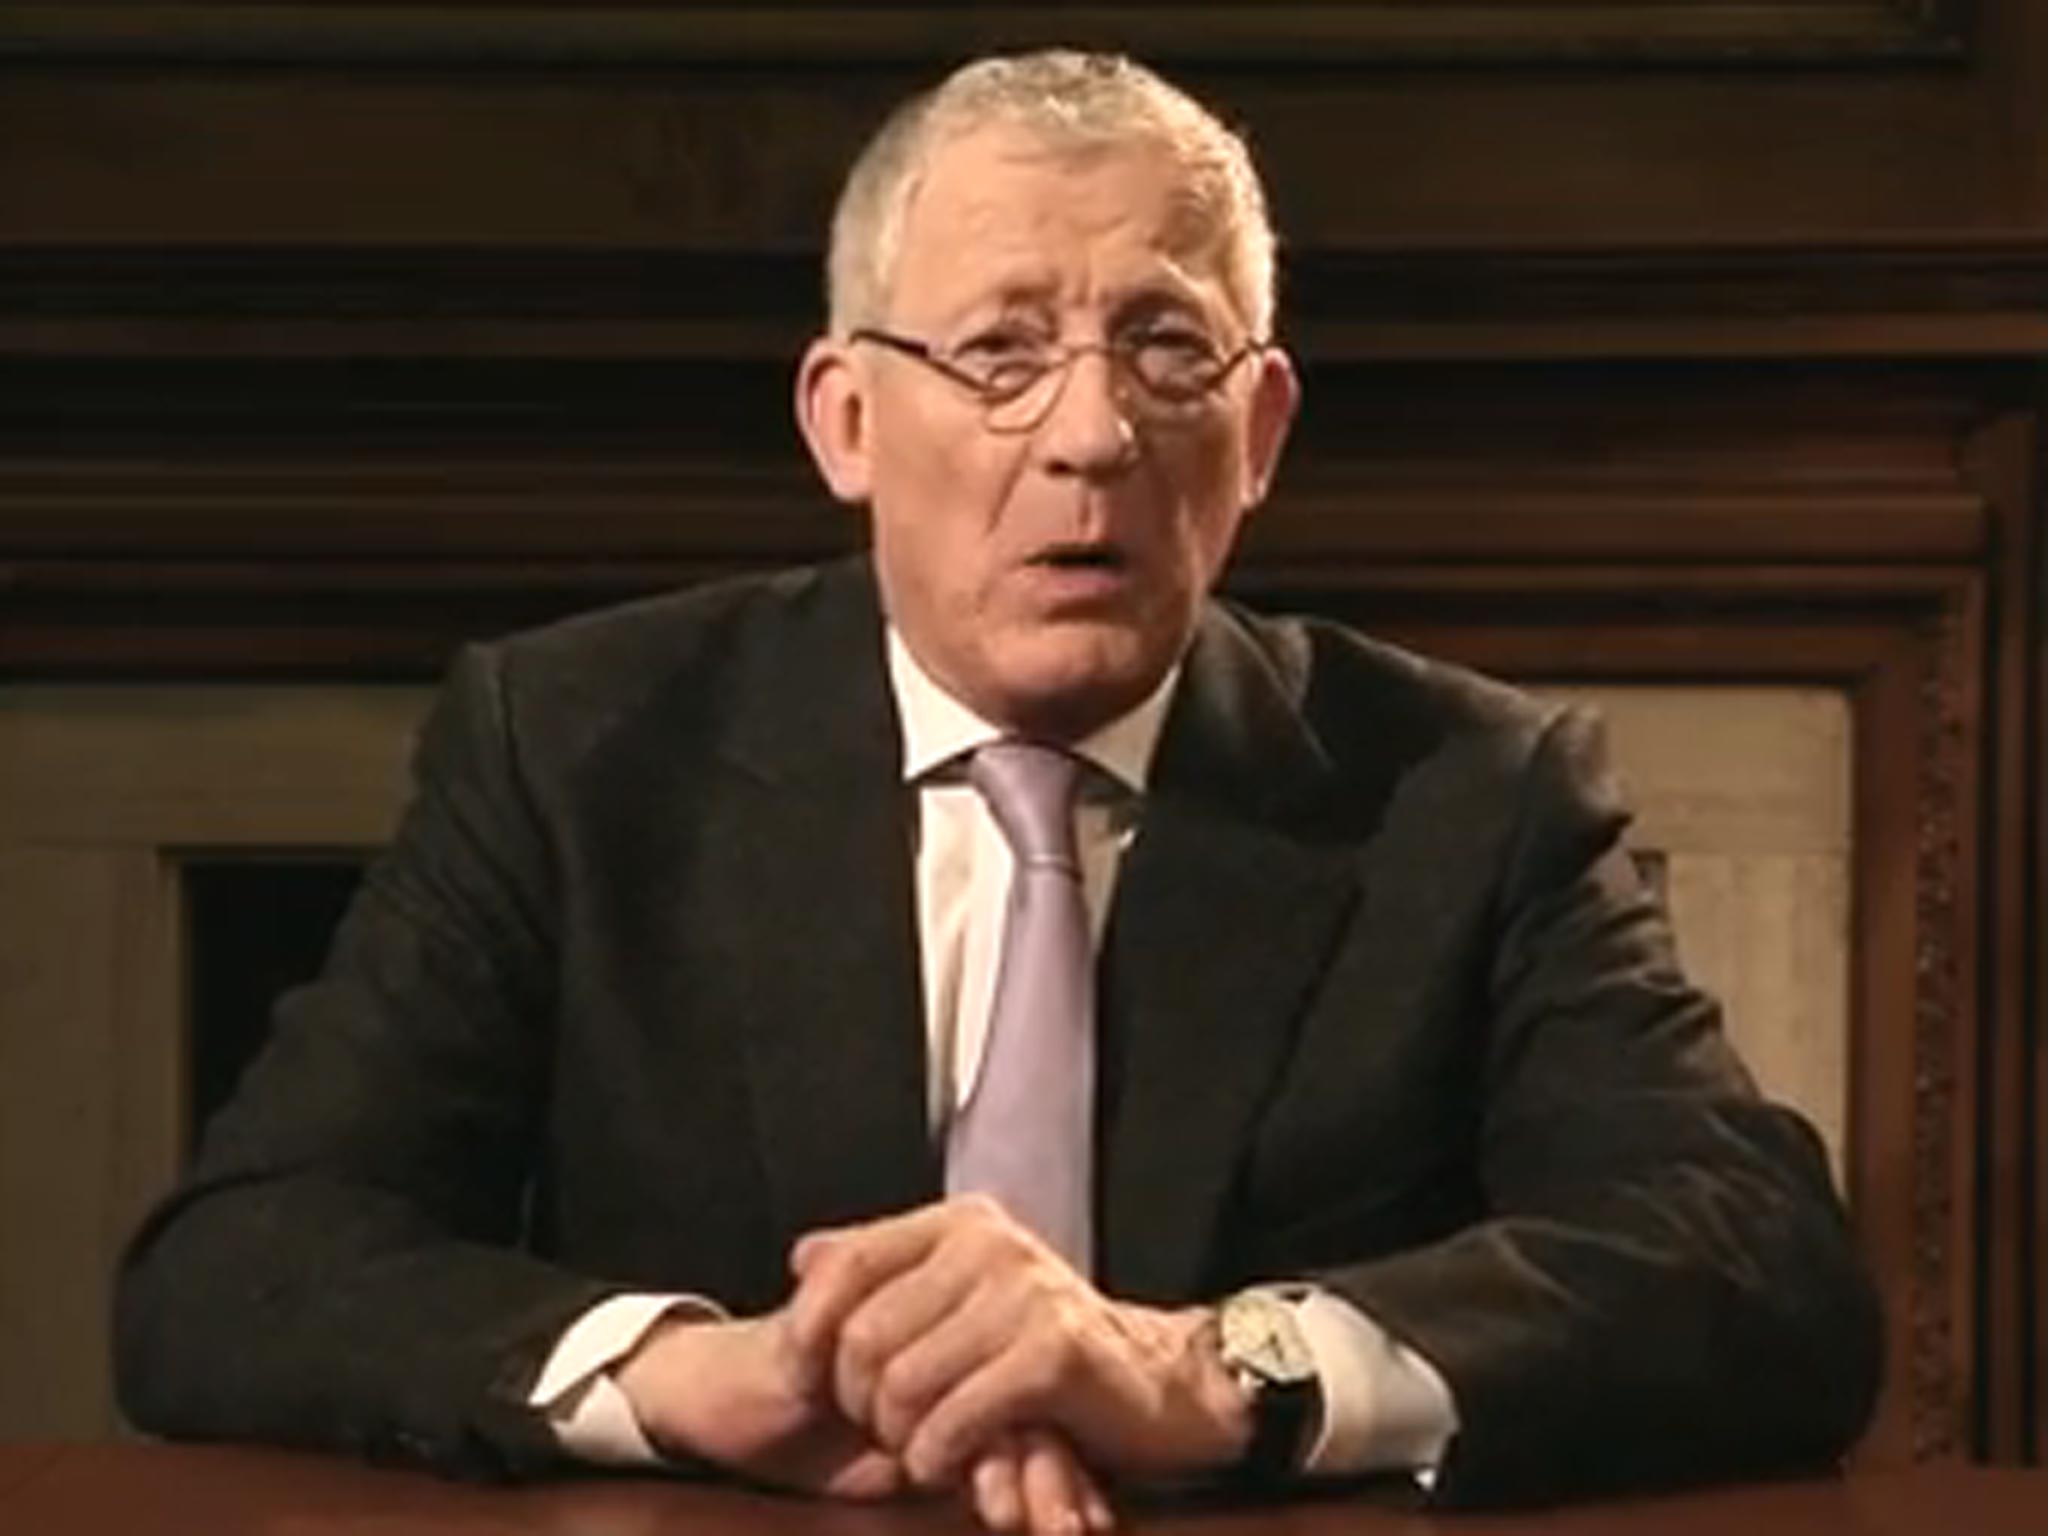 Nick Hewer shares his office bones of contention